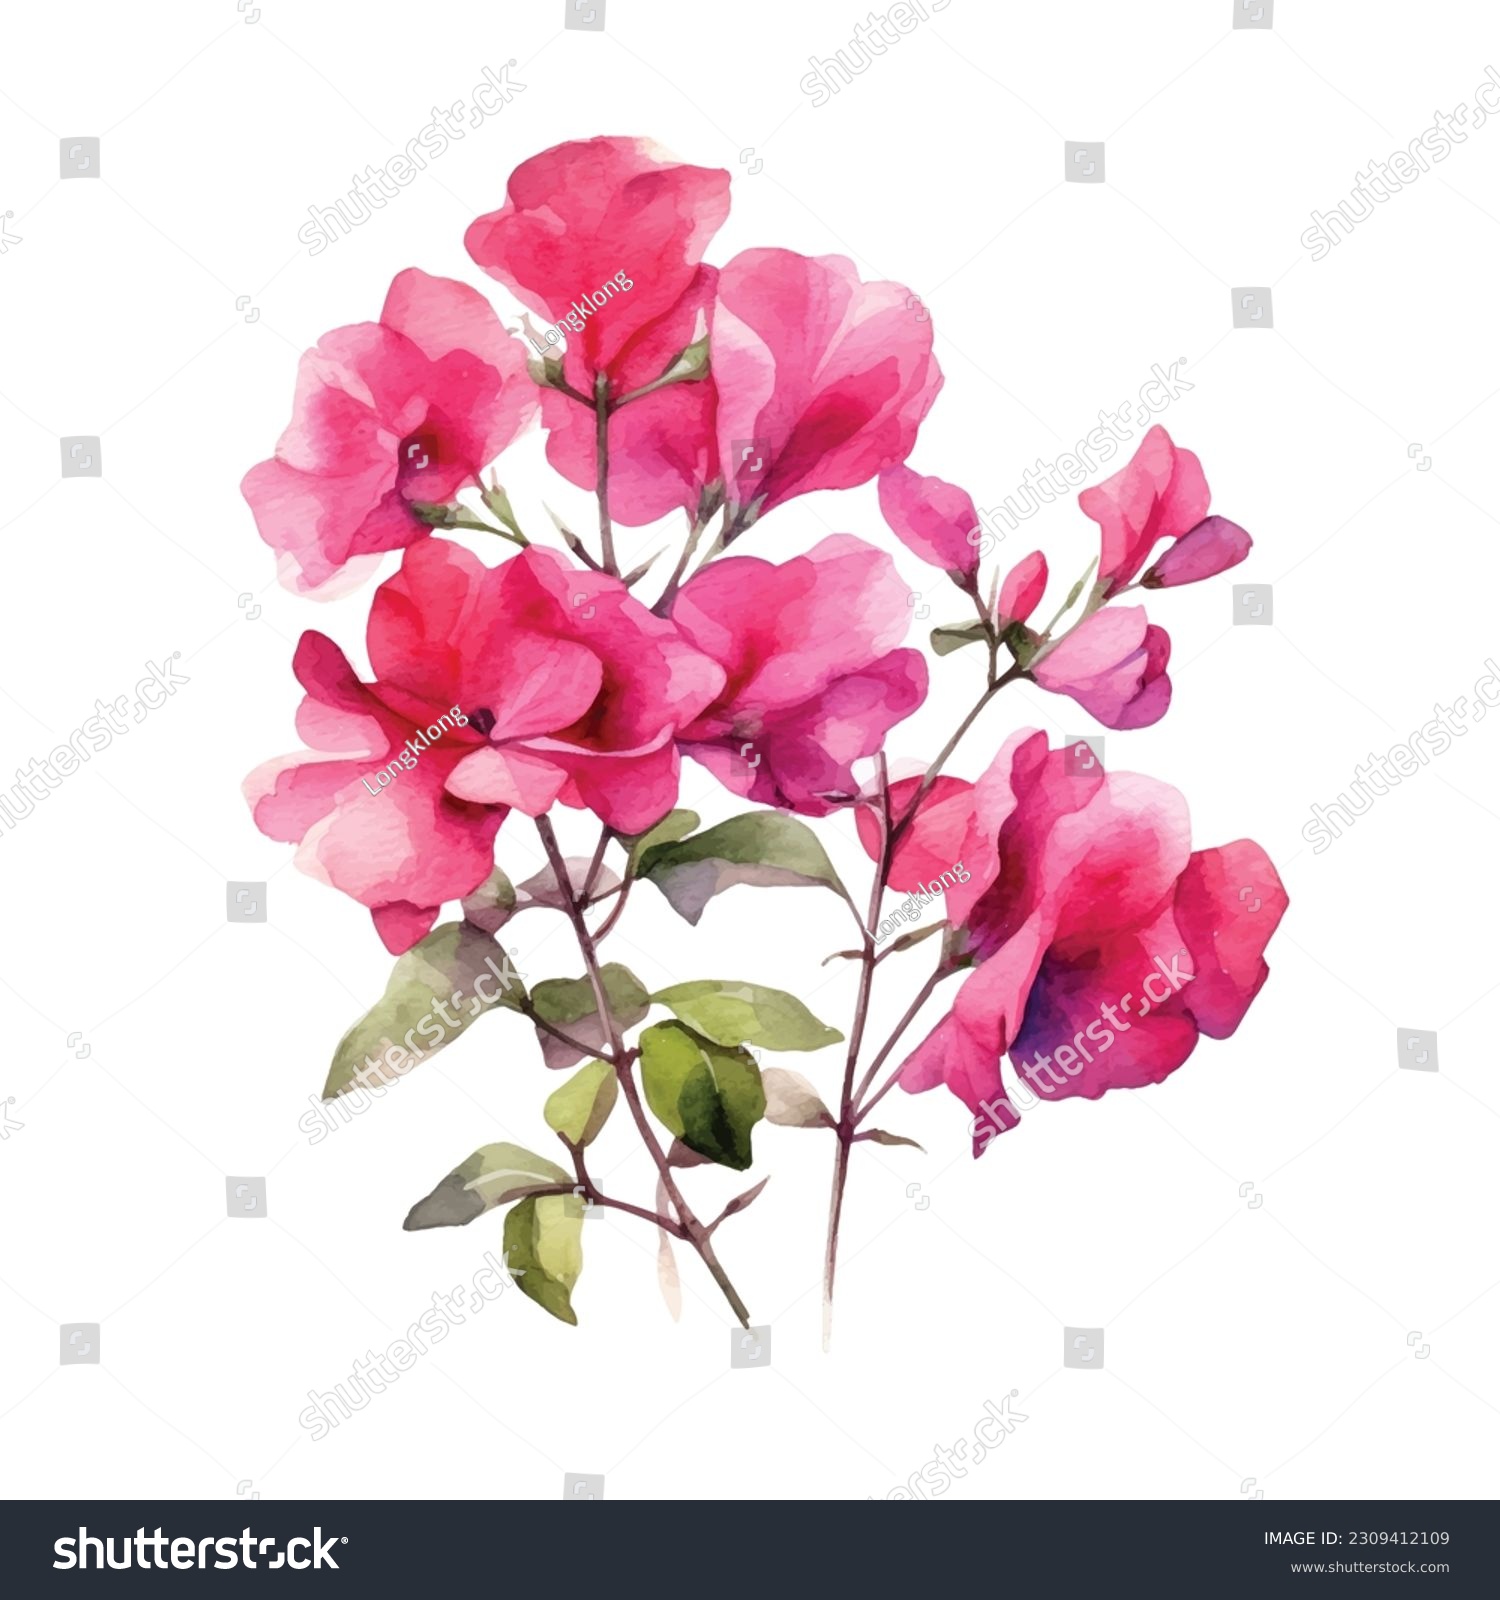 SVG of Watercolor hand drawn pink bougainvillea flower. Can be used as print, postcard, package design, invitation, greeting card, textile, stickers. svg